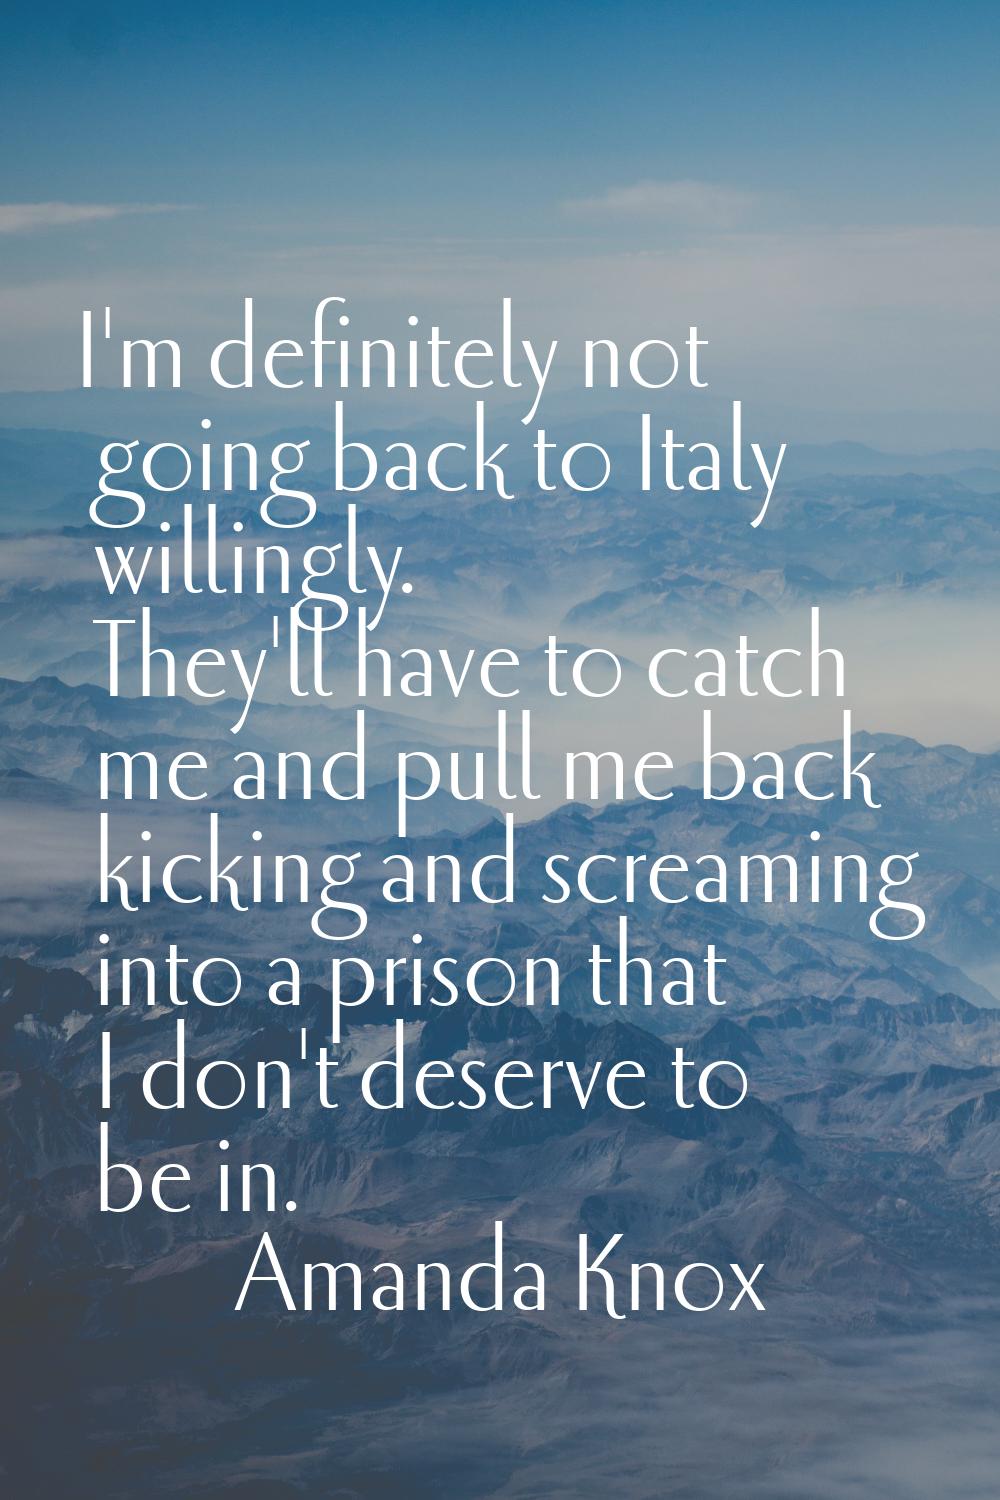 I'm definitely not going back to Italy willingly. They'll have to catch me and pull me back kicking